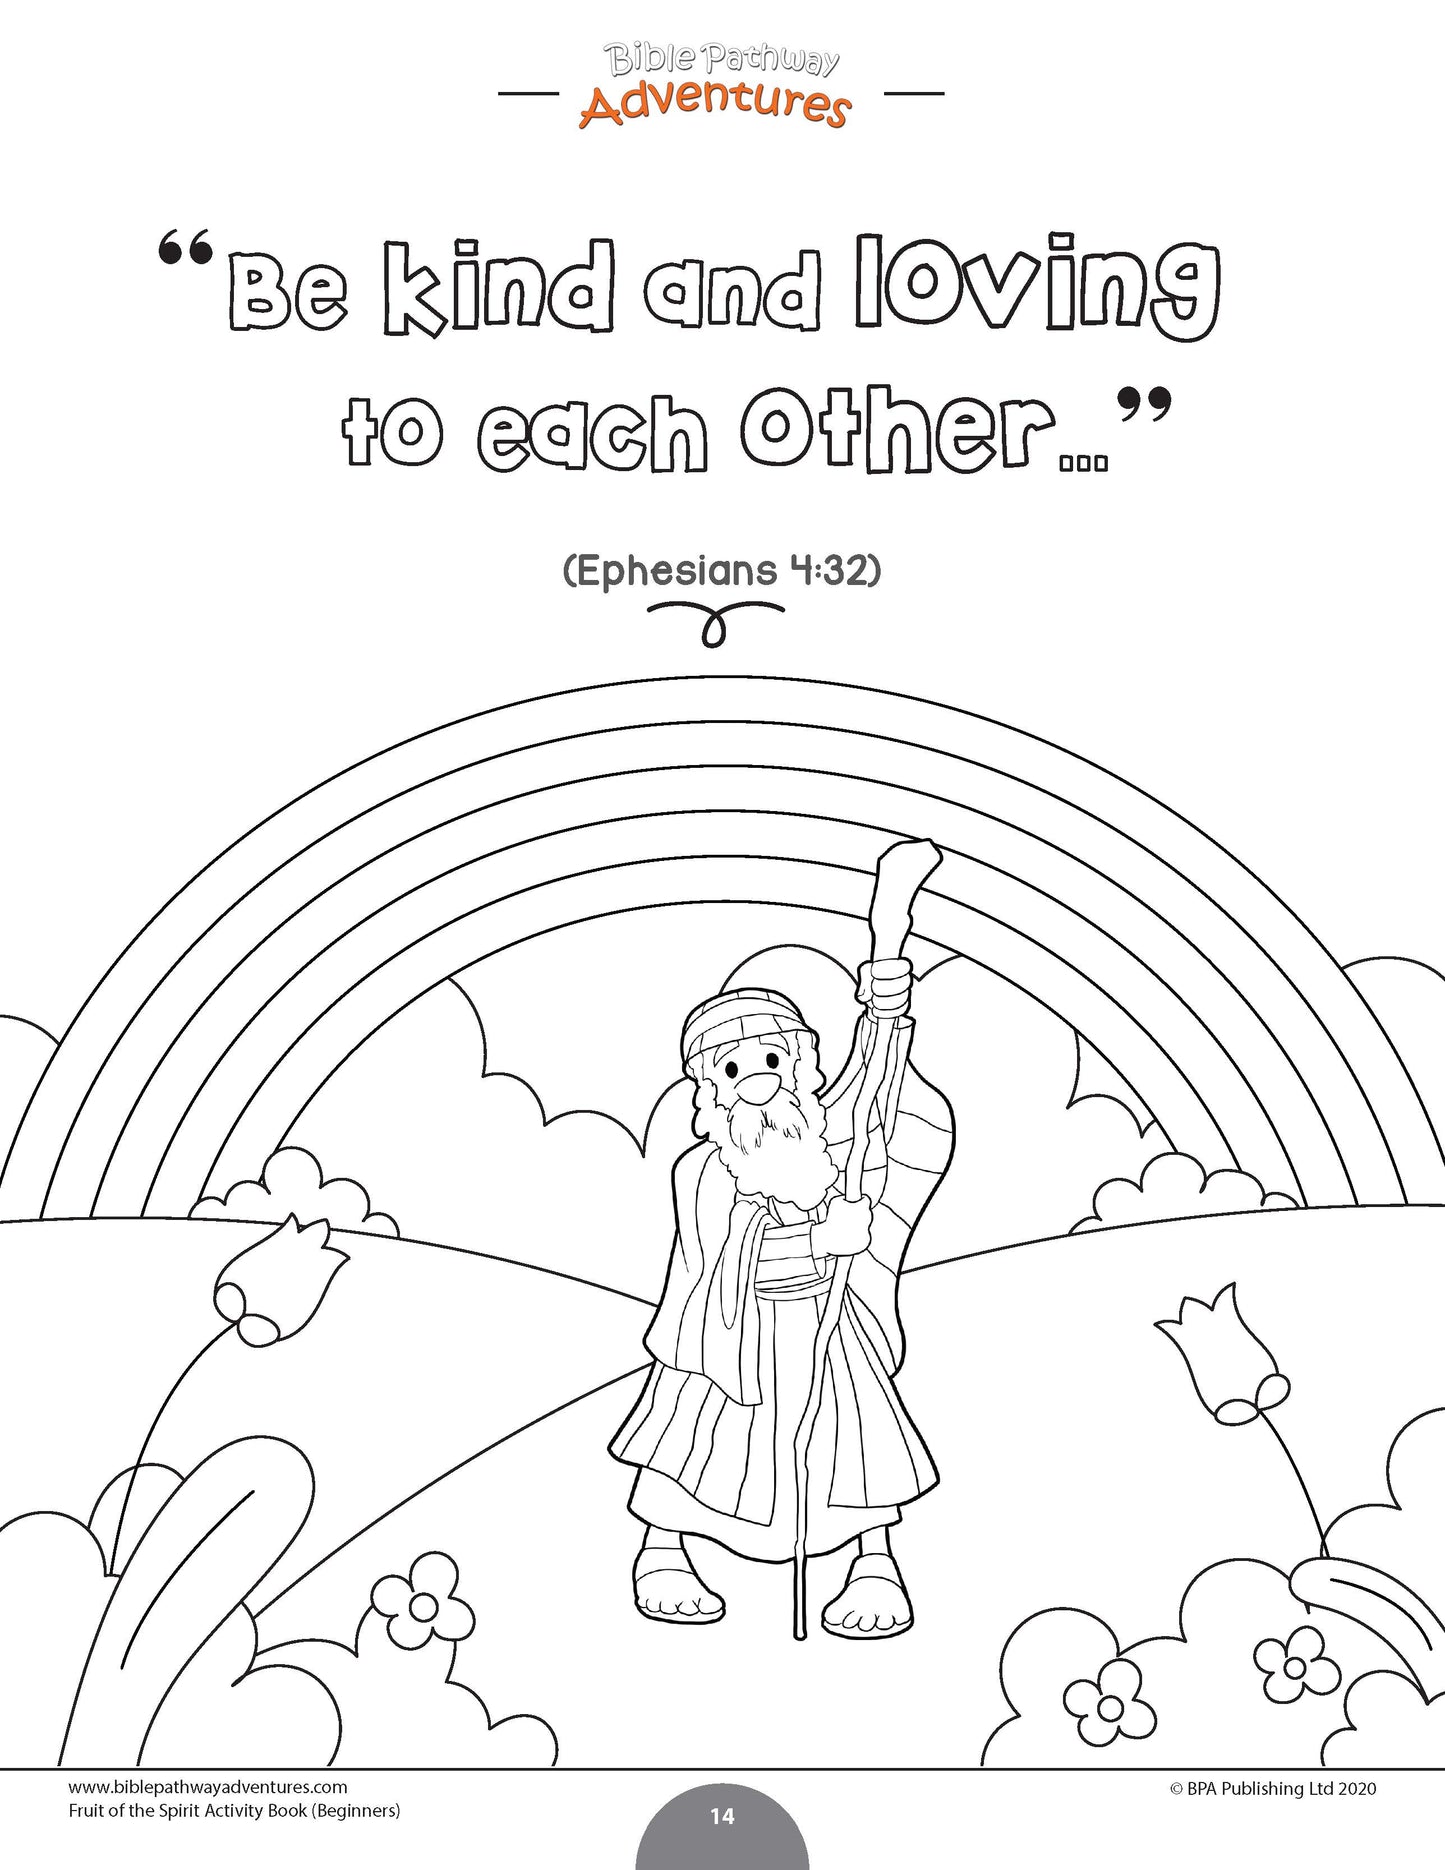 Kindness: Fruit of the Spirit Activity Book for Beginners (PDF)